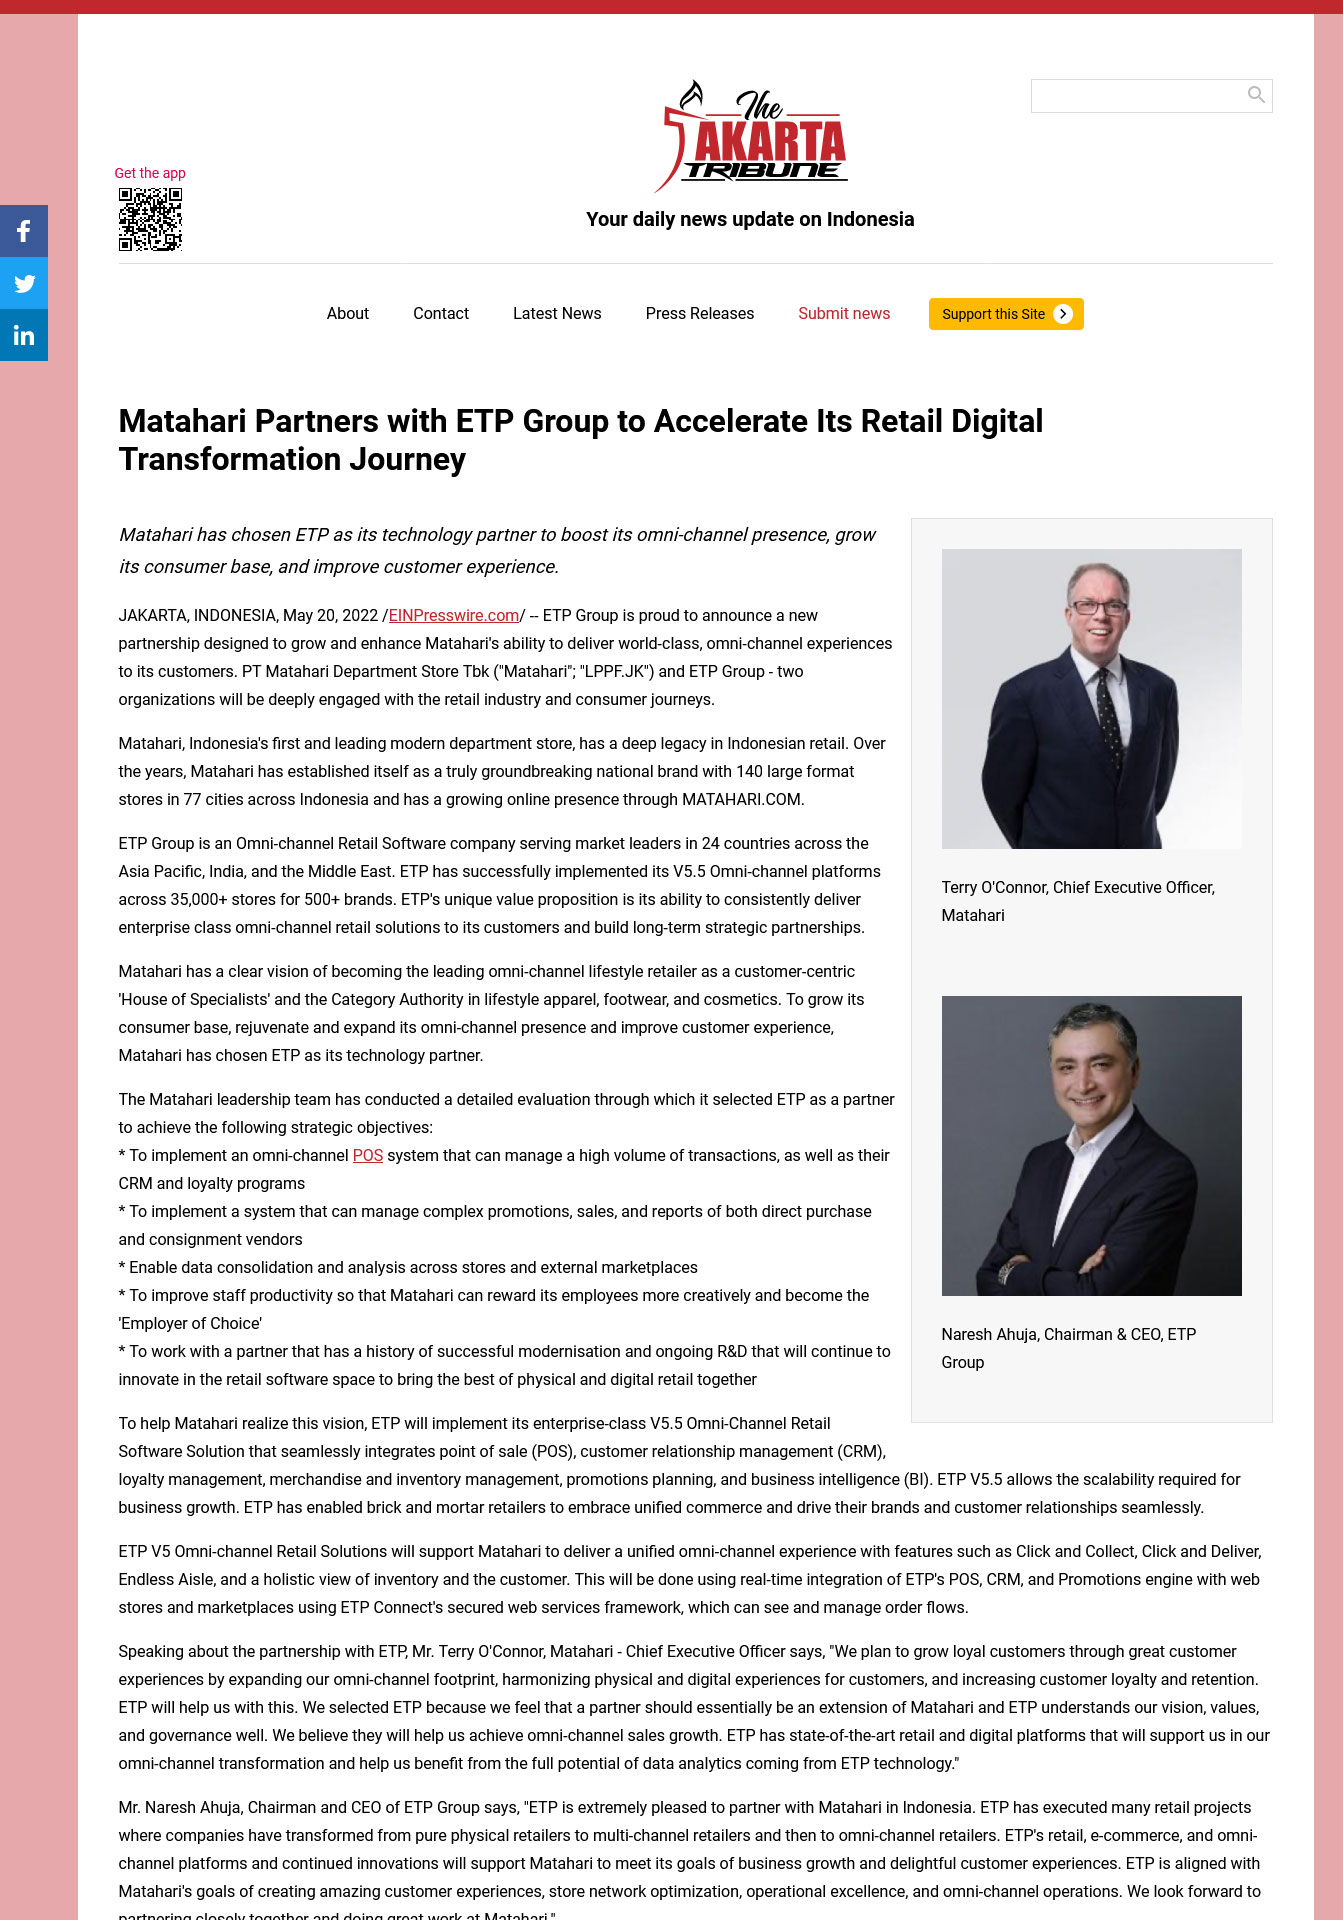 The Jakarta Tribune: Matahari Partners with ETP Group to Accelerate Its Retail Digital Transformation Journey